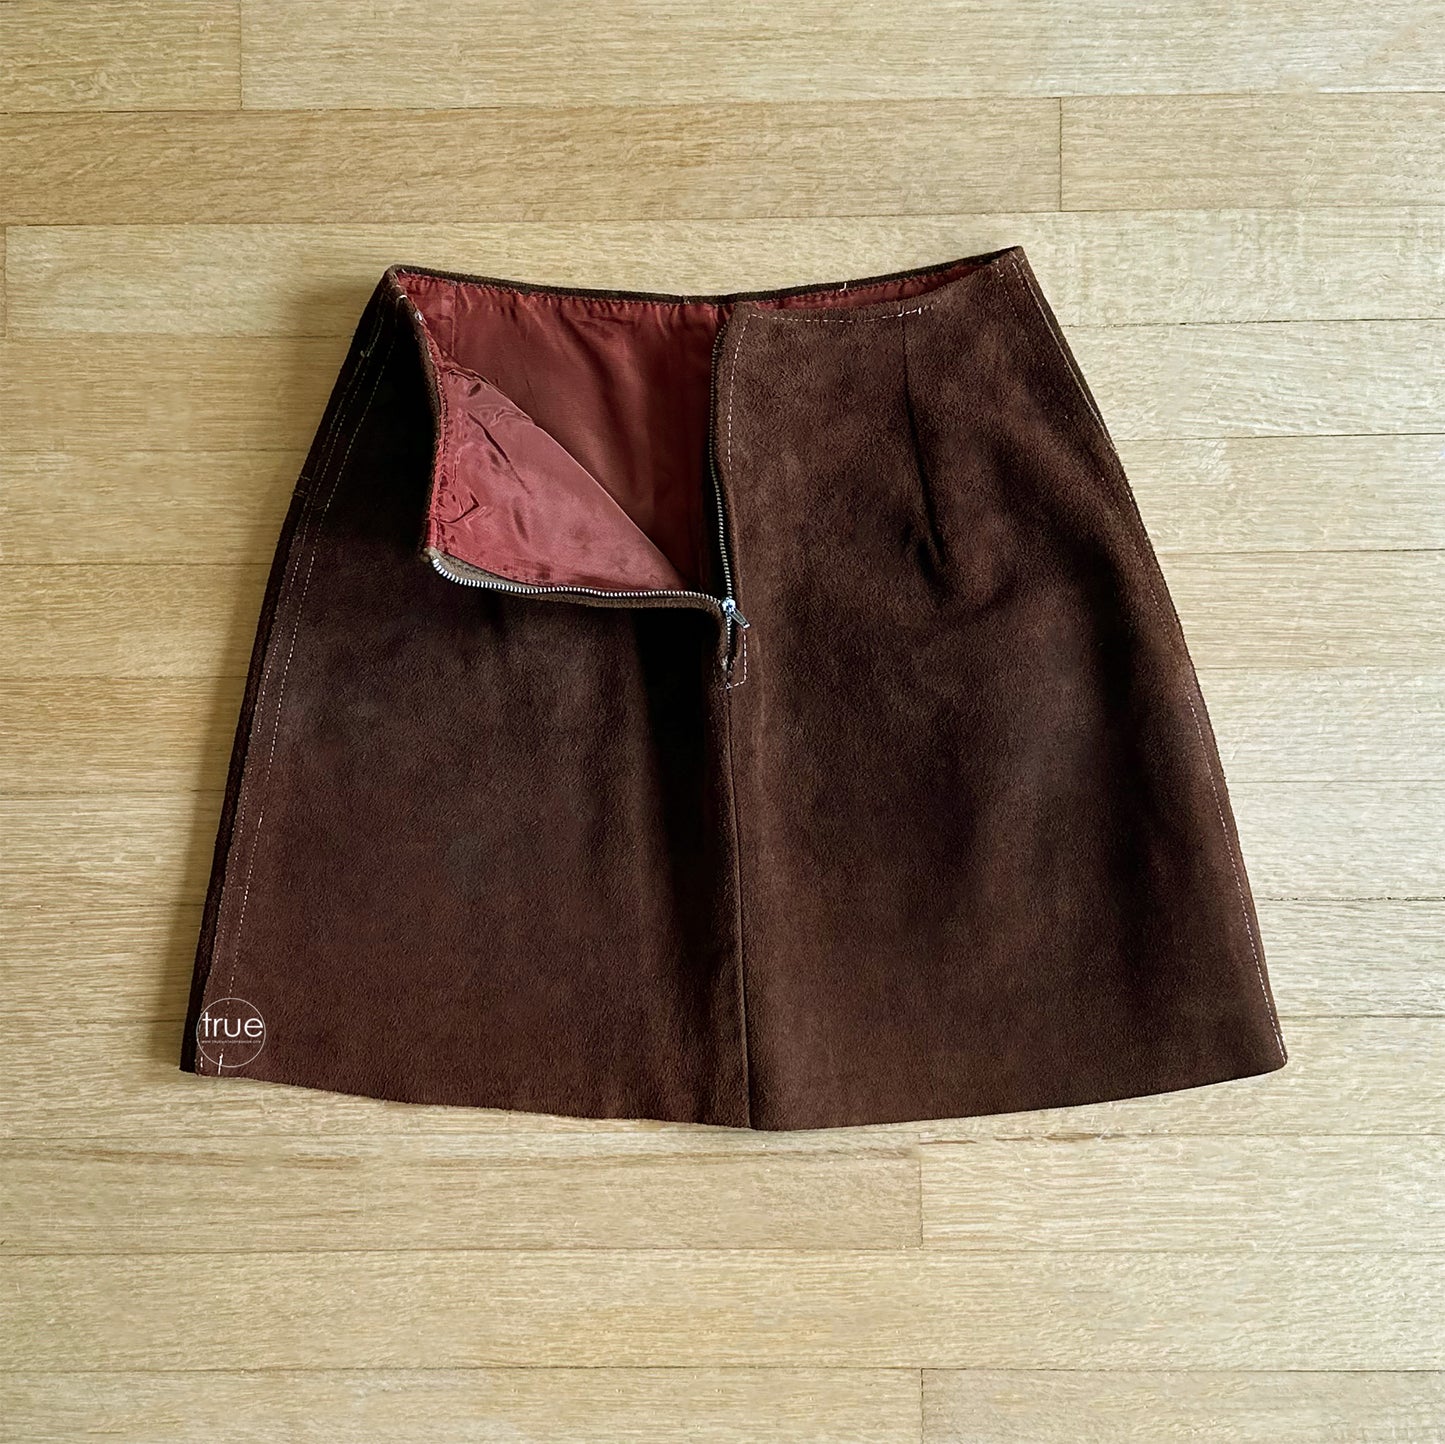 vintage 1960's suede mini skirt ...woodstock era chocolate leather suede topstitched circle pockets w/brass o-ring zippers